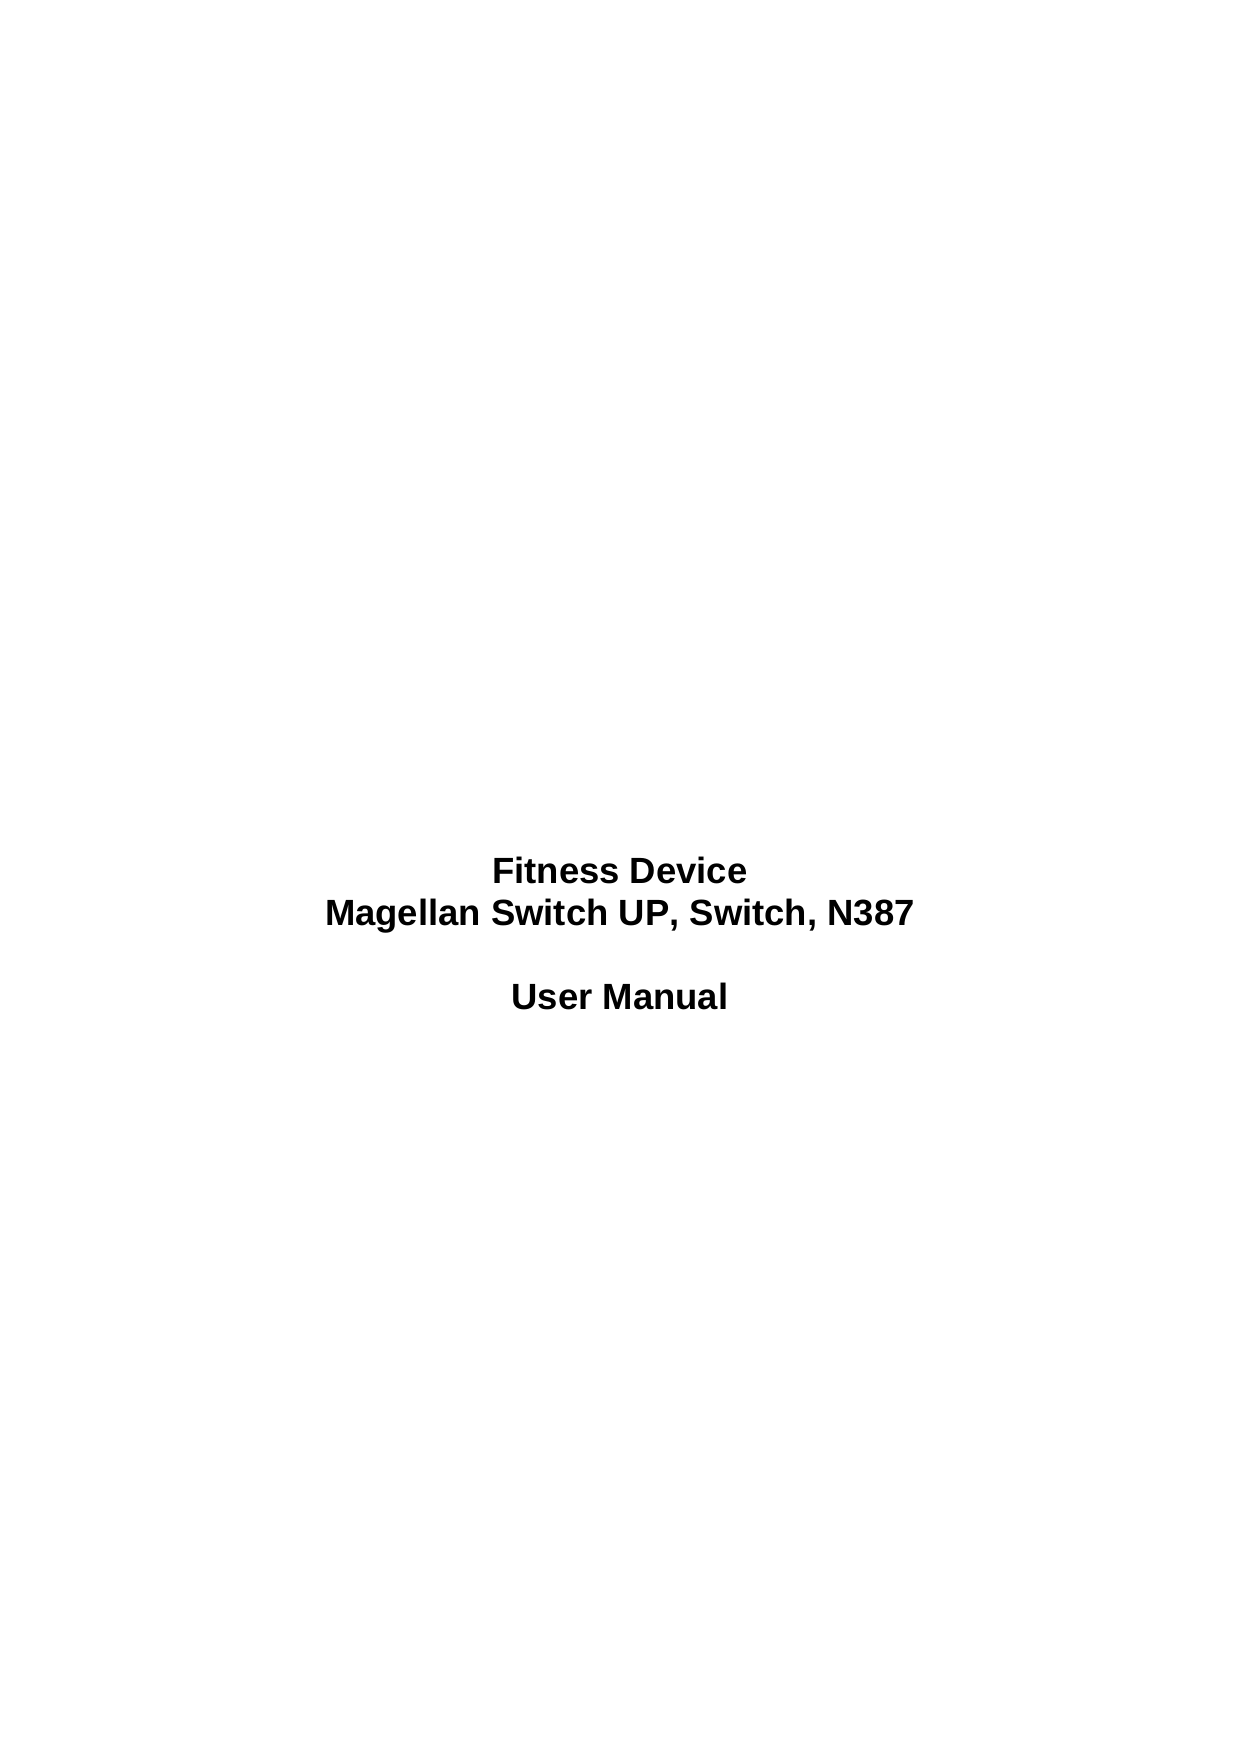                Fitness Device Magellan Switch UP, Switch, N387   User Manual             